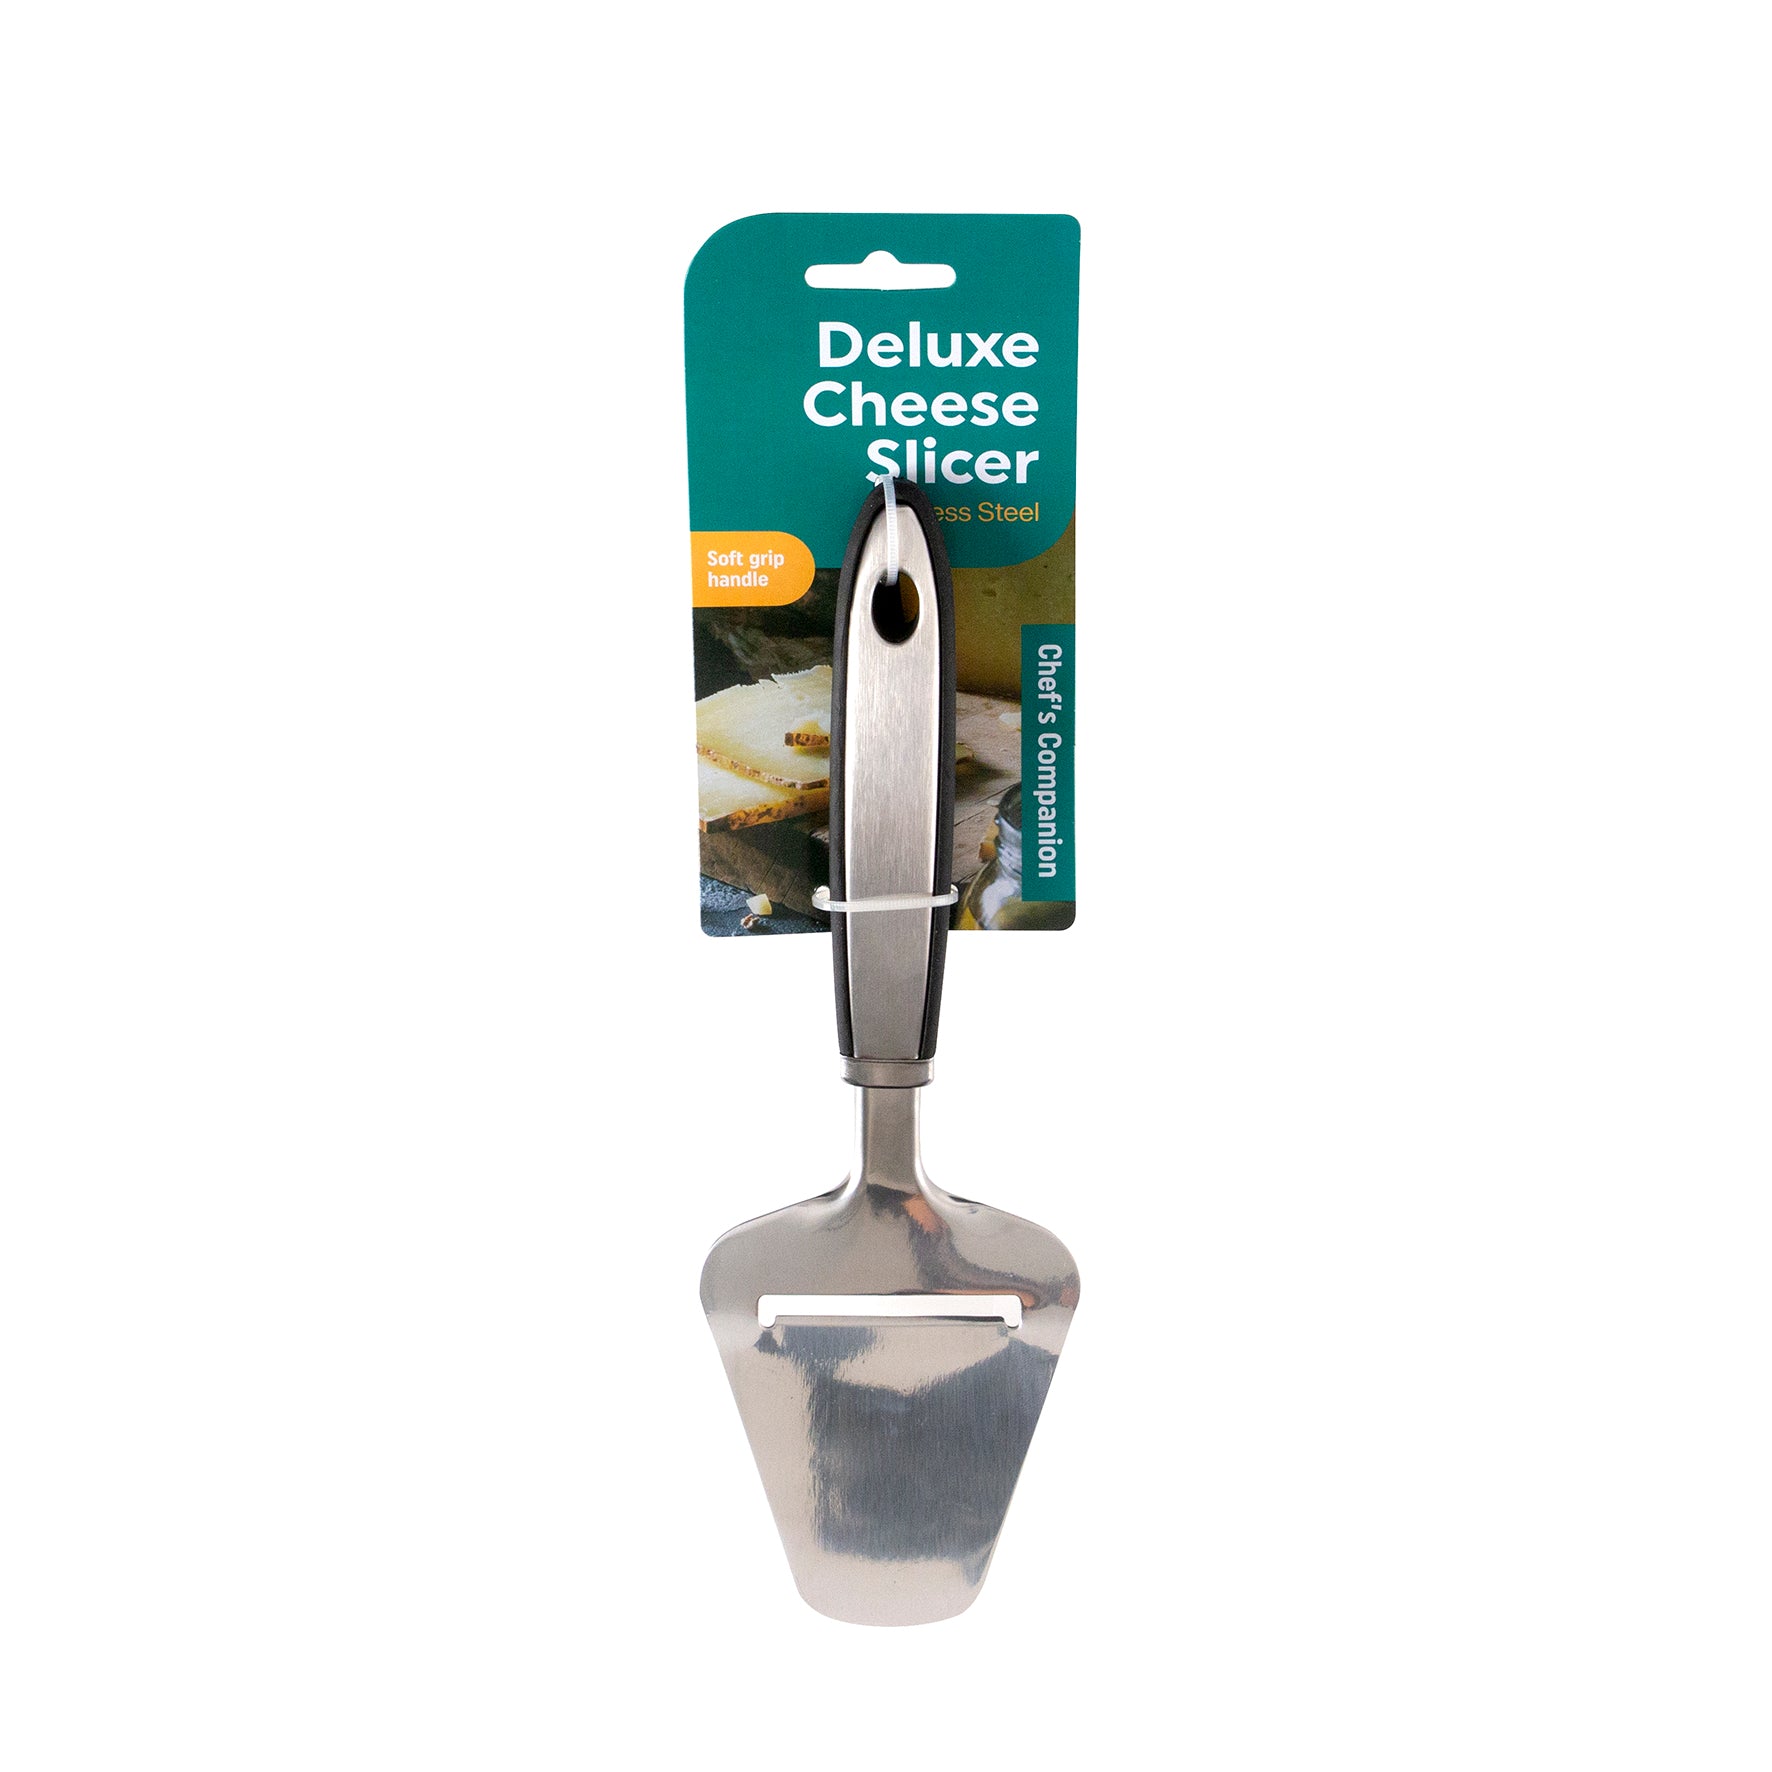 Deluxe Cheese Slicer Stainless Steel - 27cm 1 Piece - Dollars and Sense